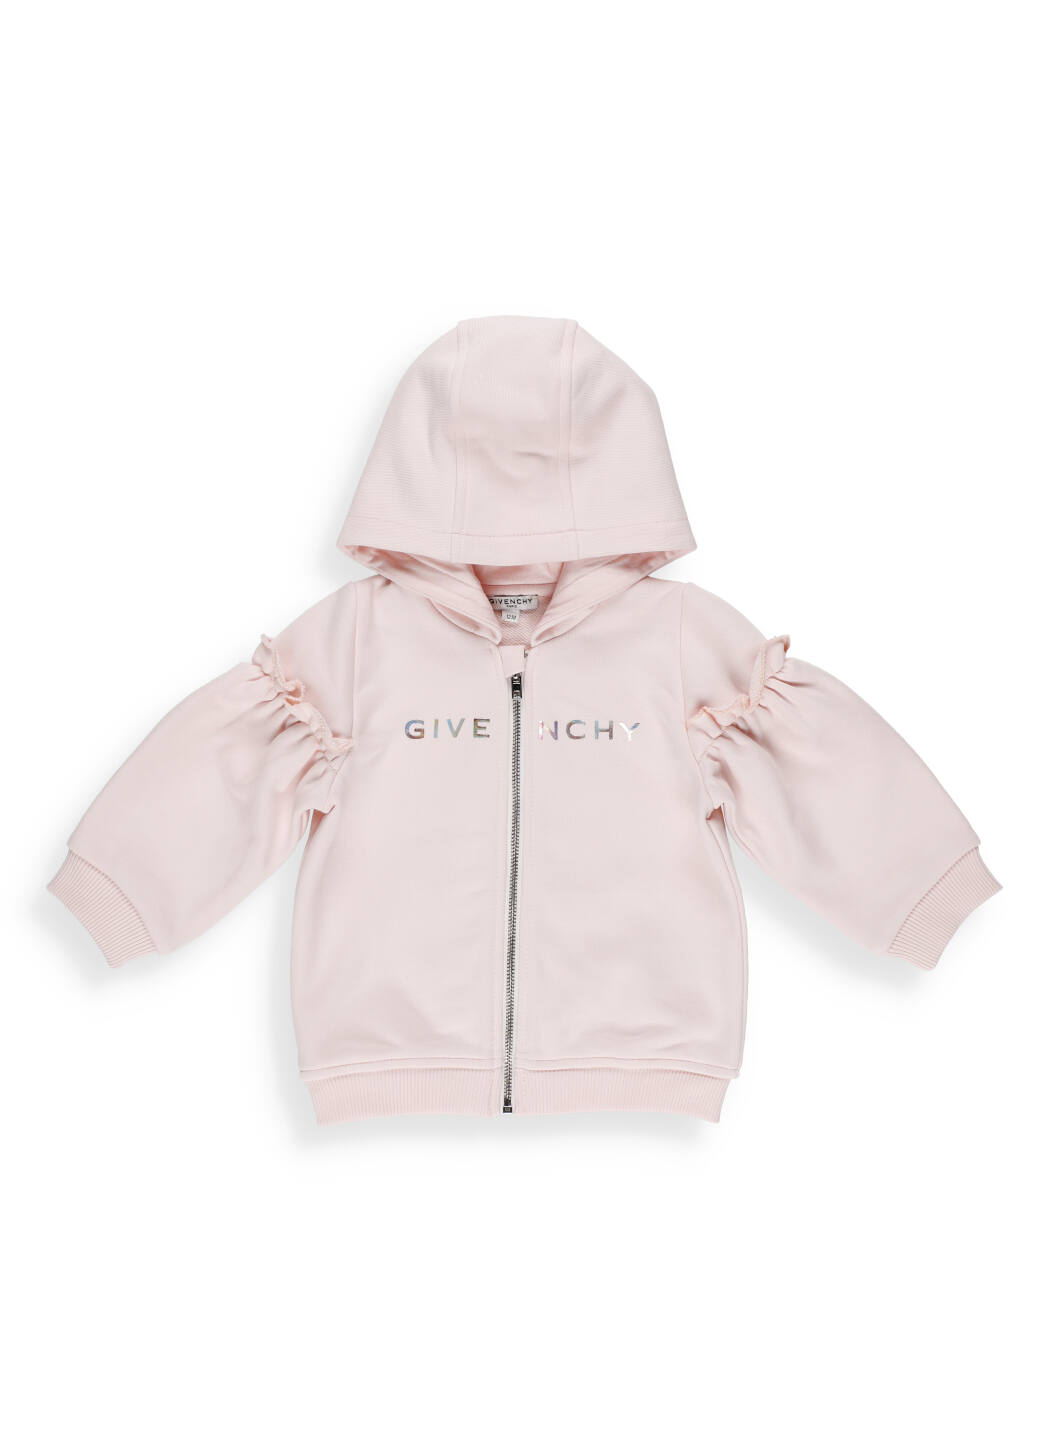 GIVENCHY COTTON SWEATSHIRT WITH HOOD,H05165 B 45S